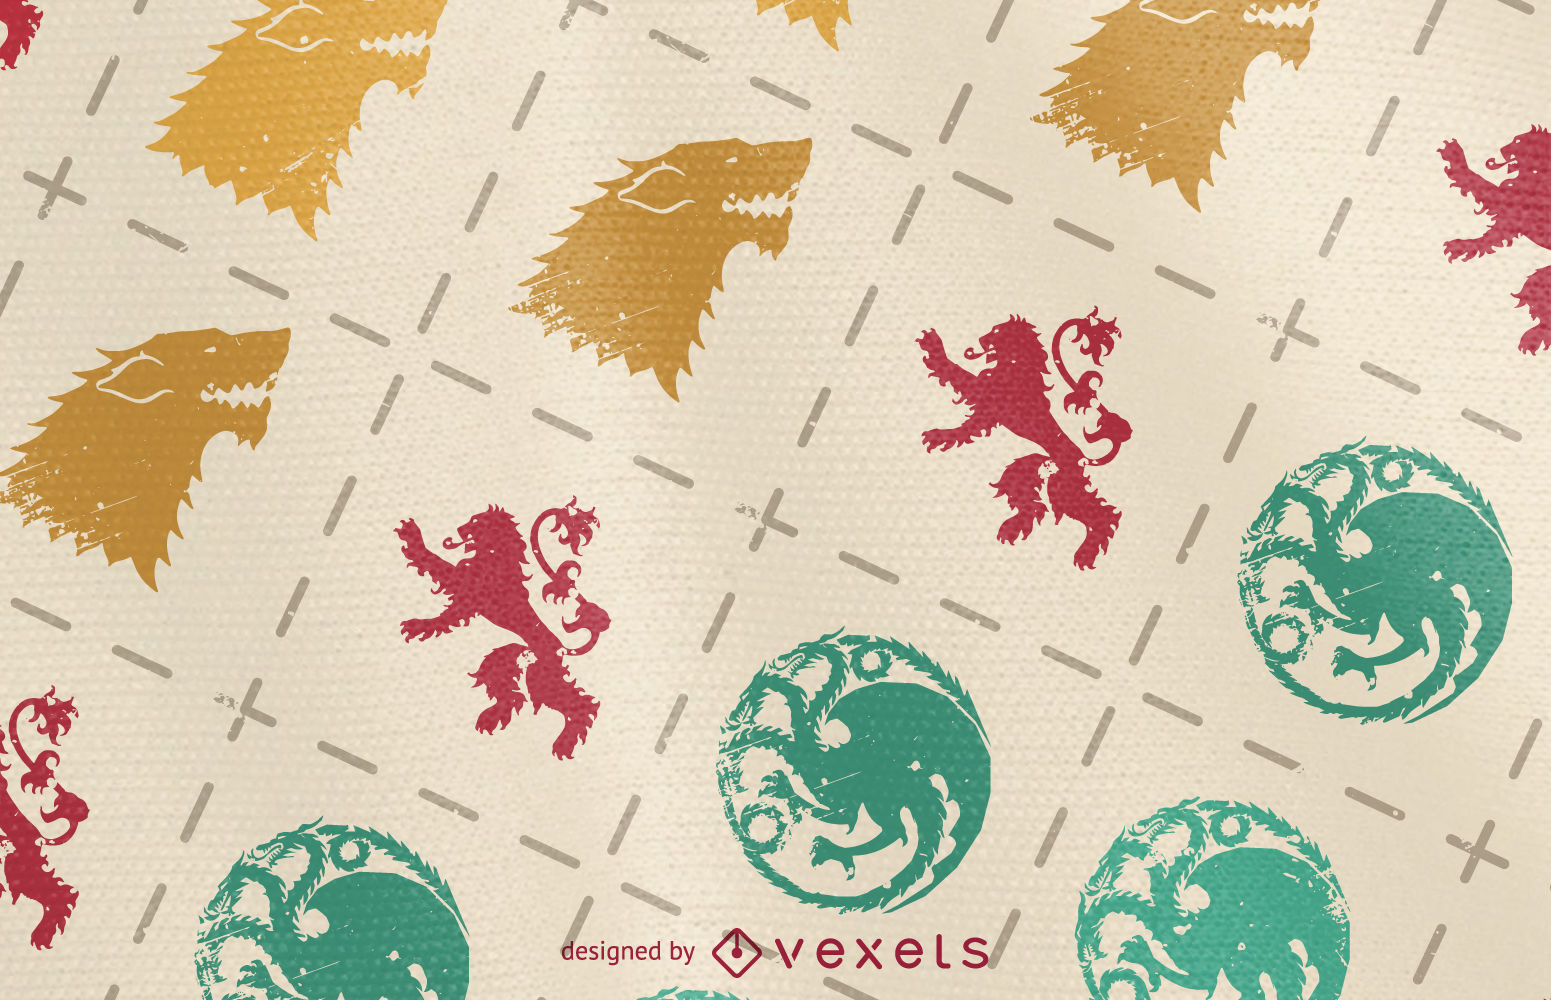 Game Of Thrones Embroidery Patterns Game Of Thrones Pattern Vector Download